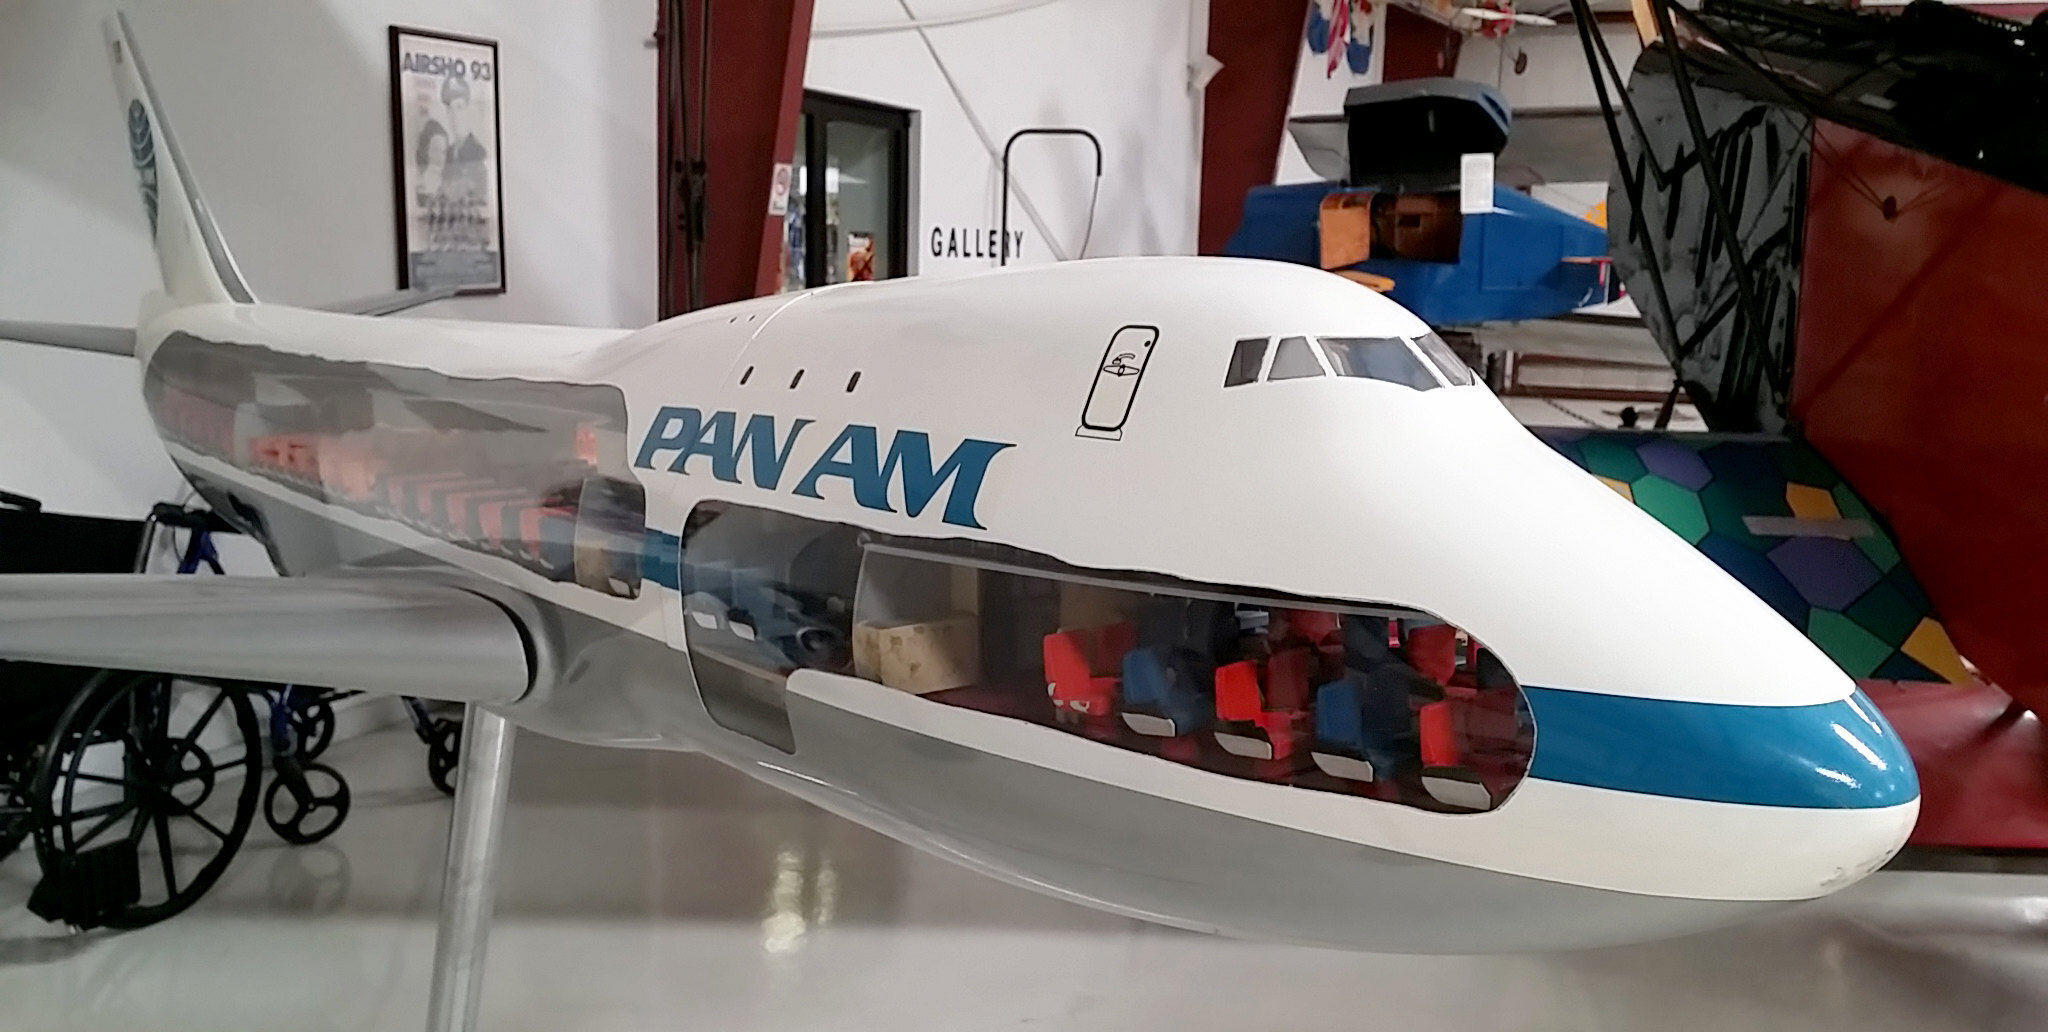 Boeing 747-100 model, Pan Am by Eric Friedebach via Flickr/Creative Commons